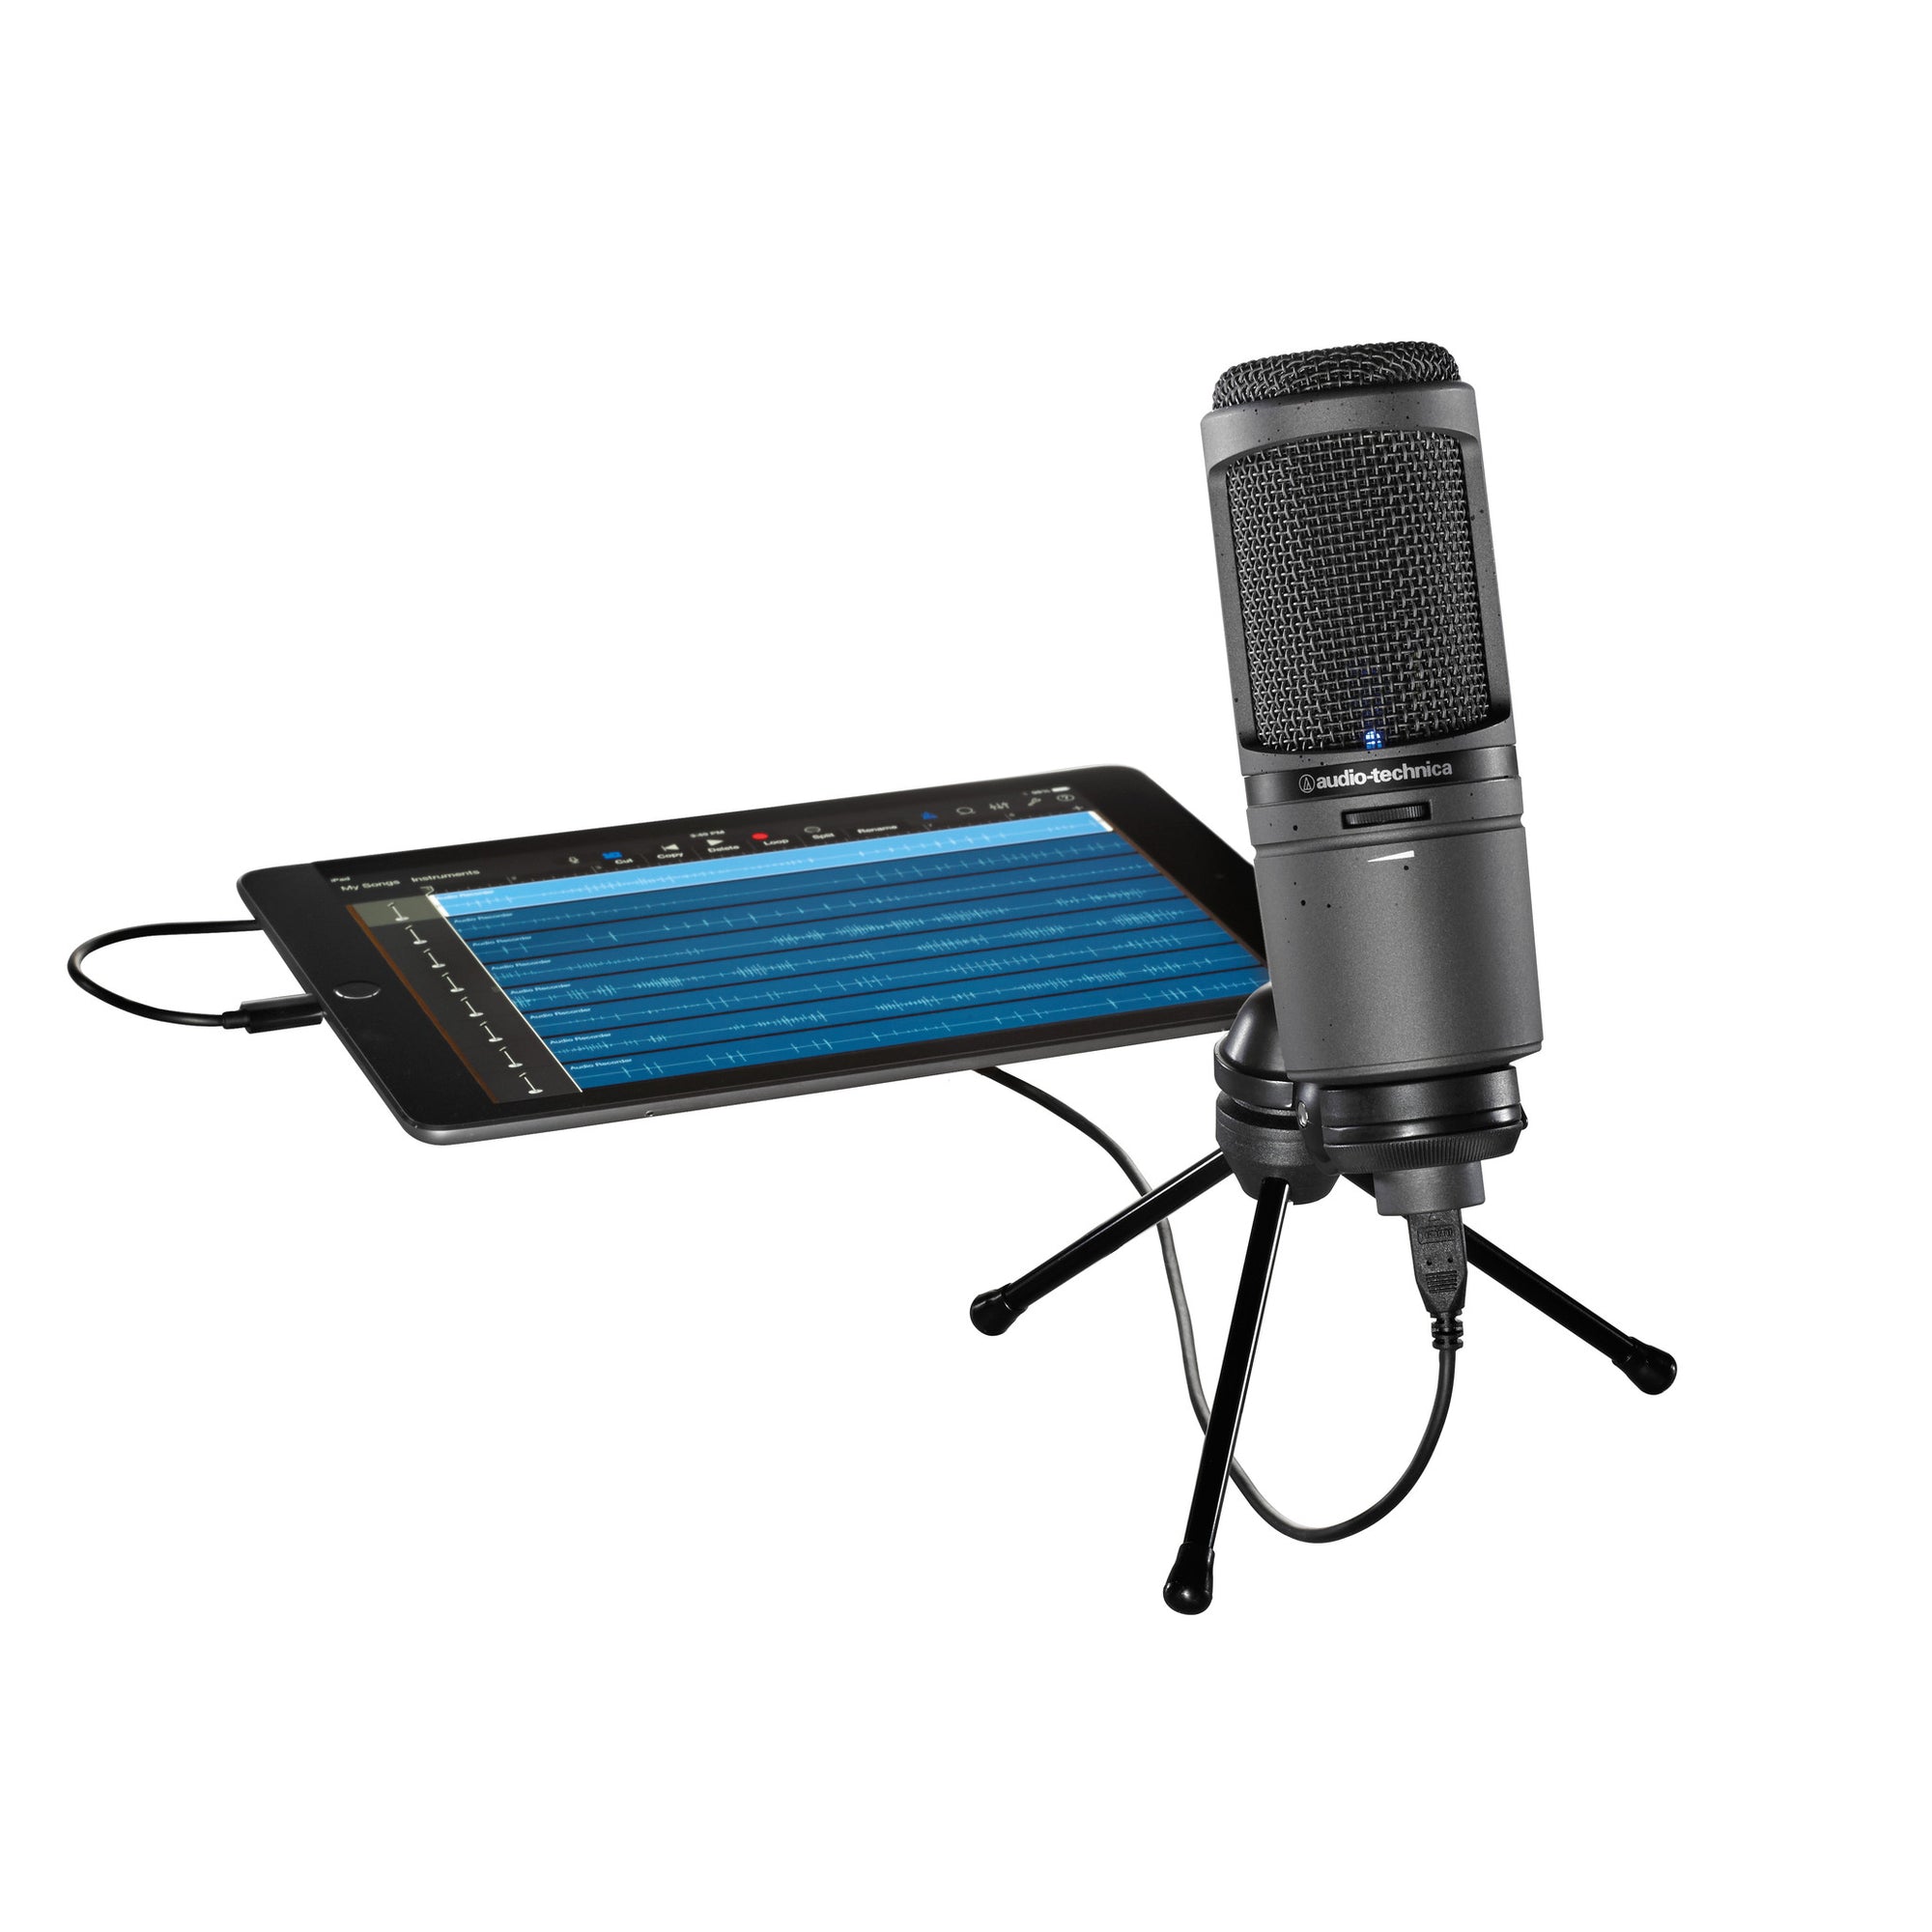 Audio Technica AT2020USBi Cardioid Condenser USB Microphone Audio Technica Condenser Microphone Combining high-resolution audio with increased connectivity options, the AT2020USBi cardioid condenser microphone adds a new level sound-quality and ...